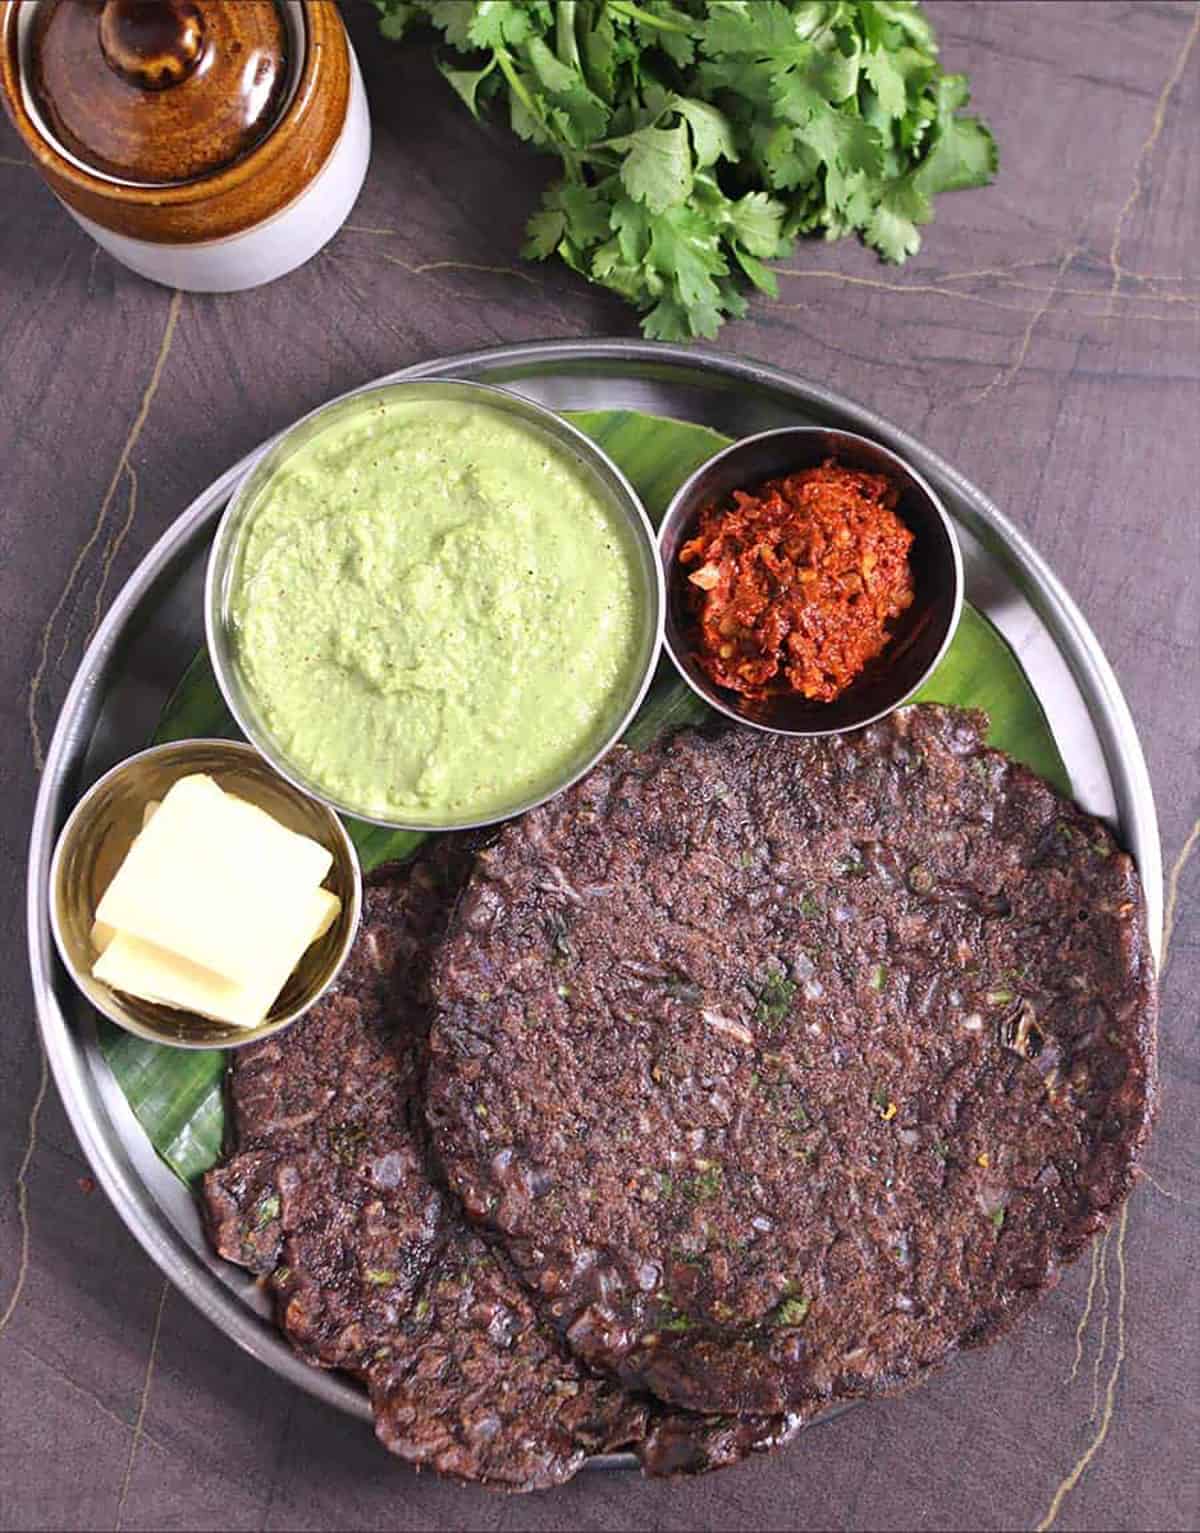 healthy ragi roti (nachni roti) served with spicy Indian chutney for breakfast, lunch and dinner.